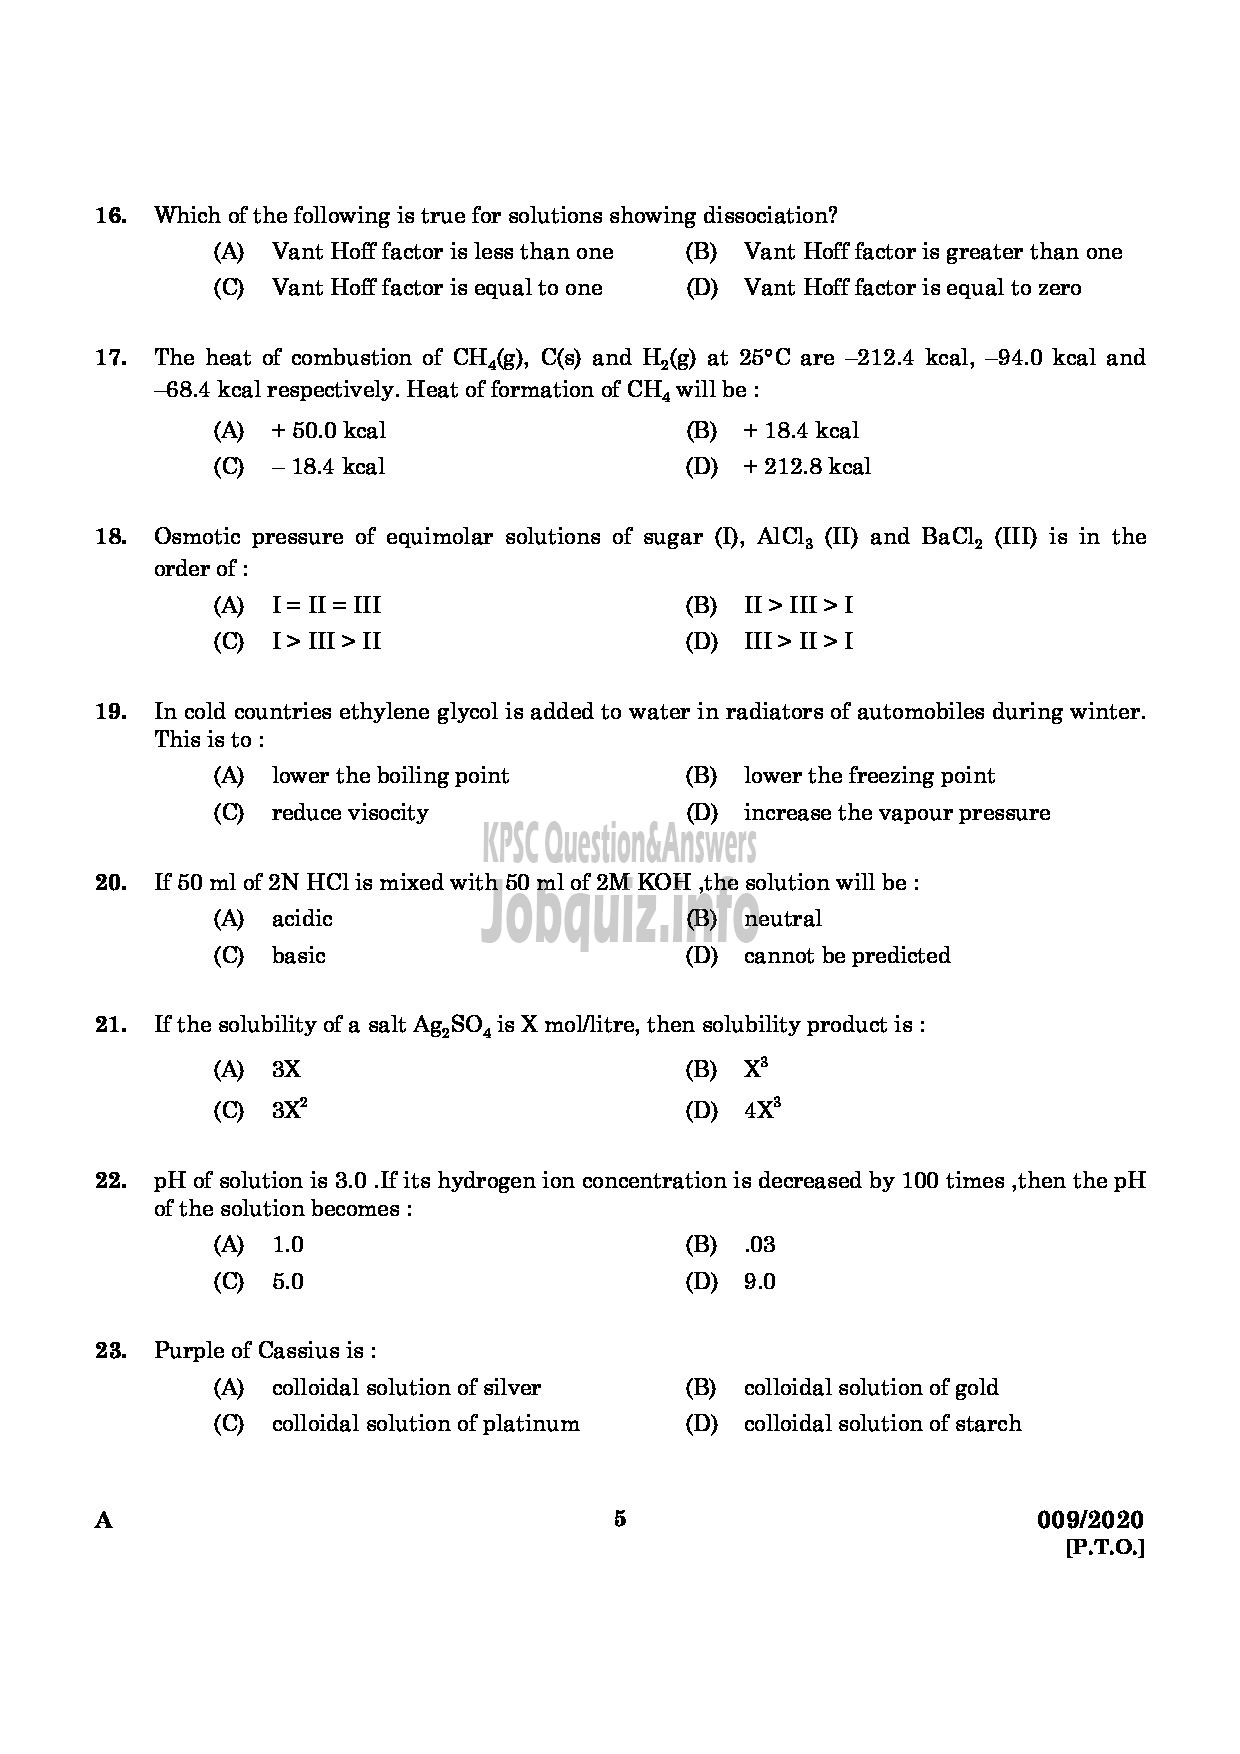 Kerala PSC Question Paper - CHEMIST IN FACTORIES AND BOILERS ENGLISH -3